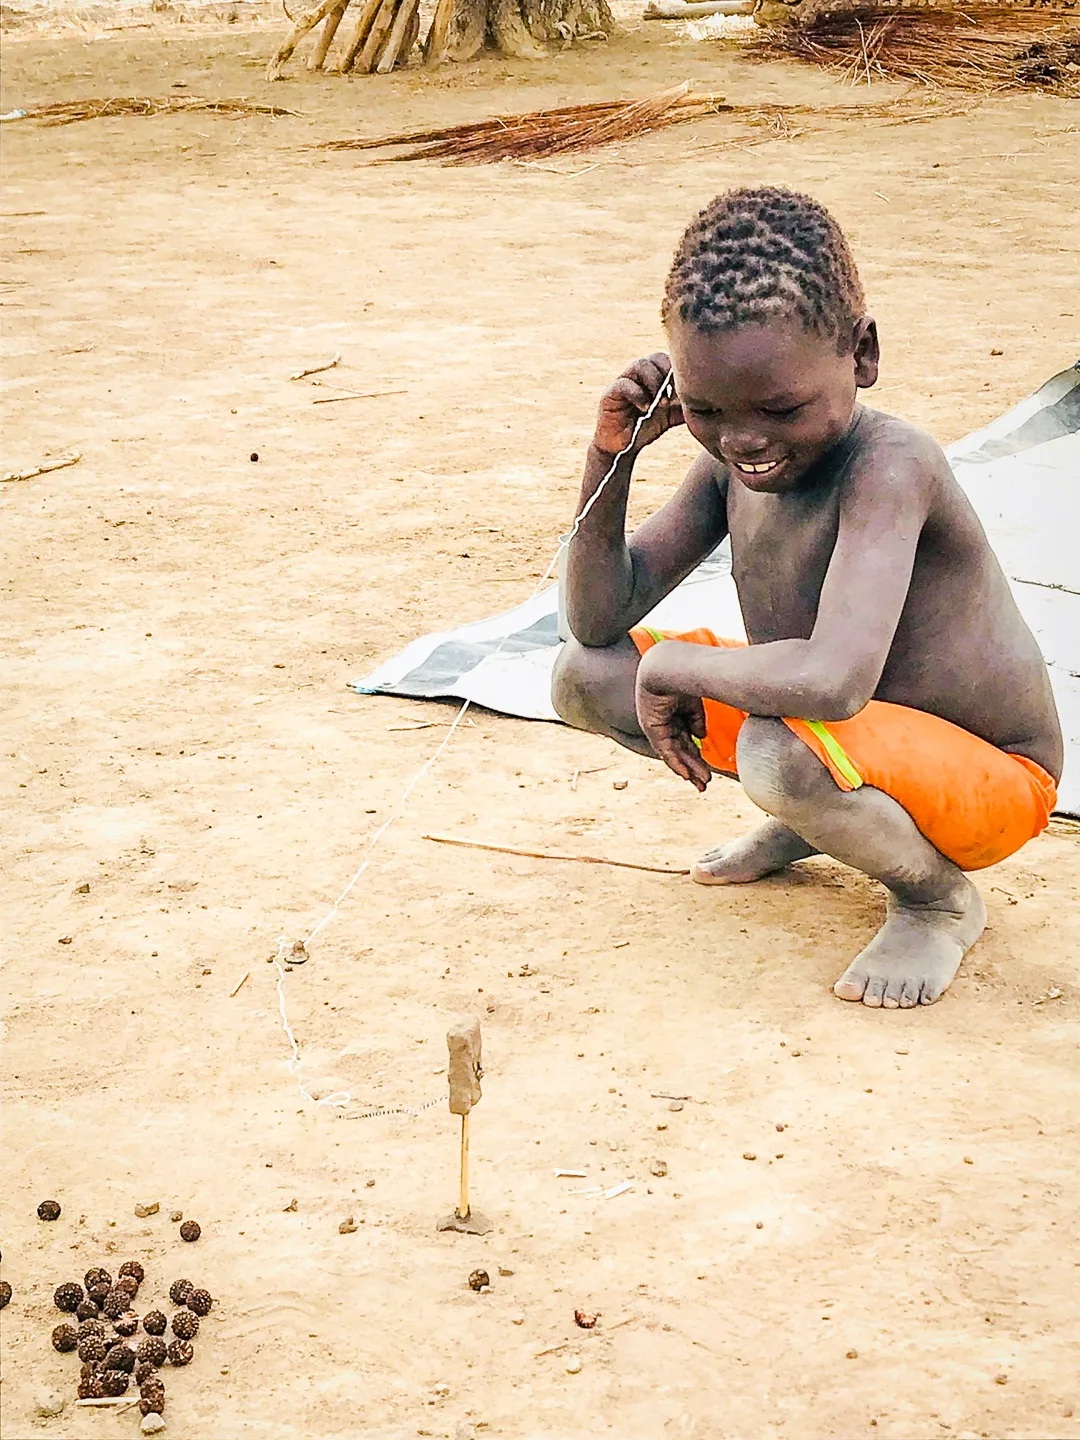 A boy in South Sudan making his own toy.